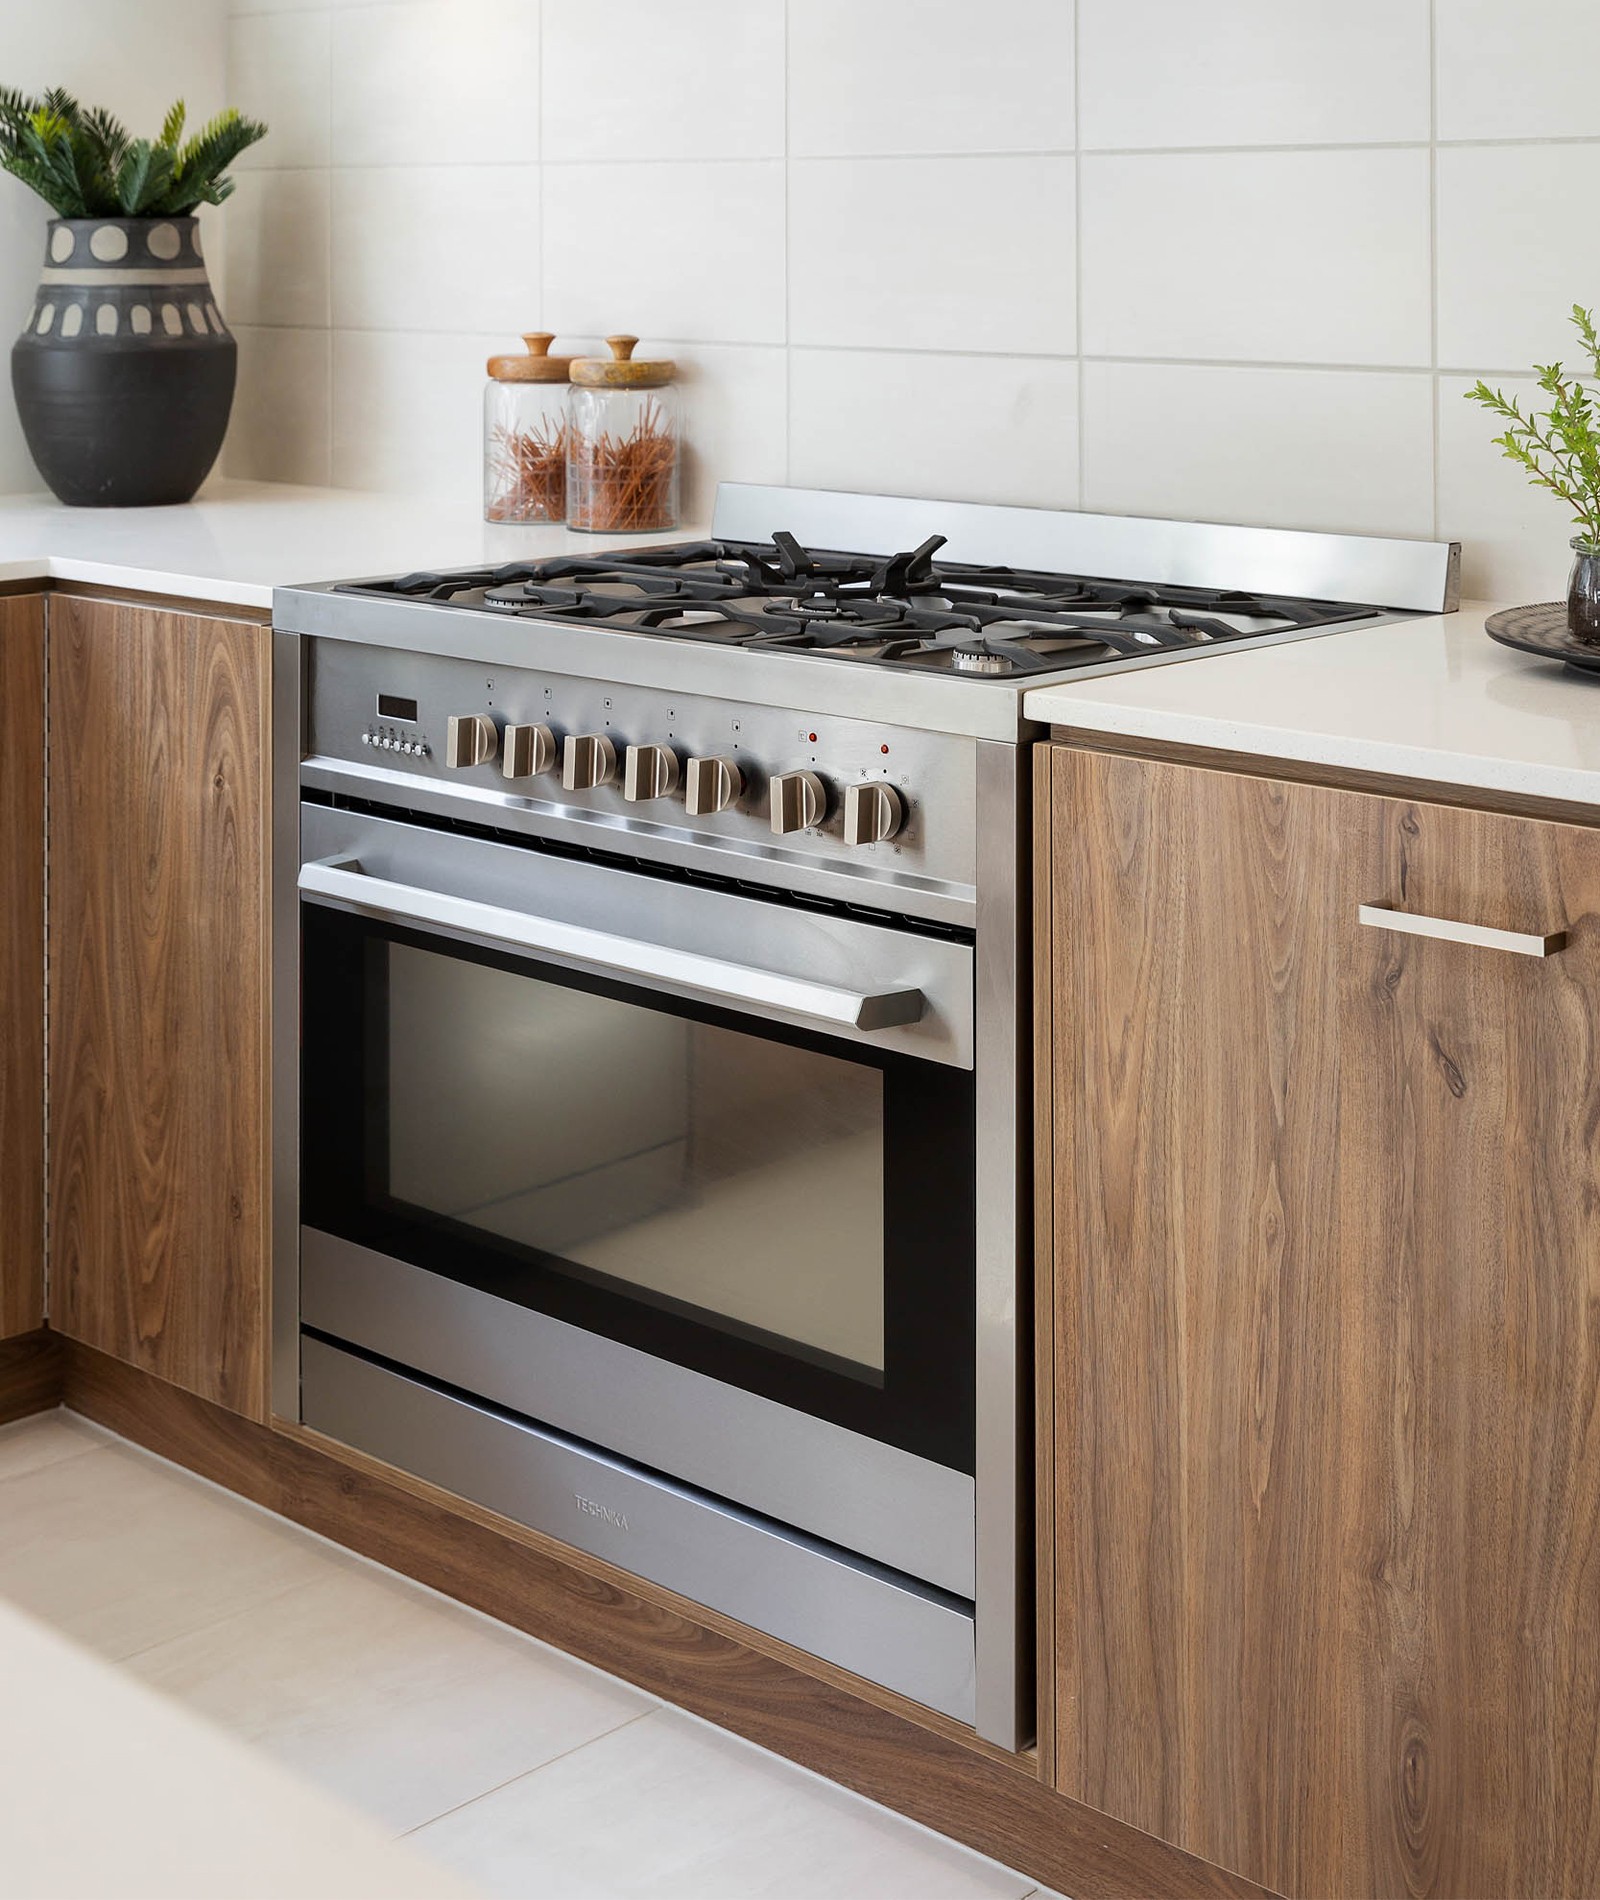 What’s Hot in Kitchens: Freestanding Range Cookers